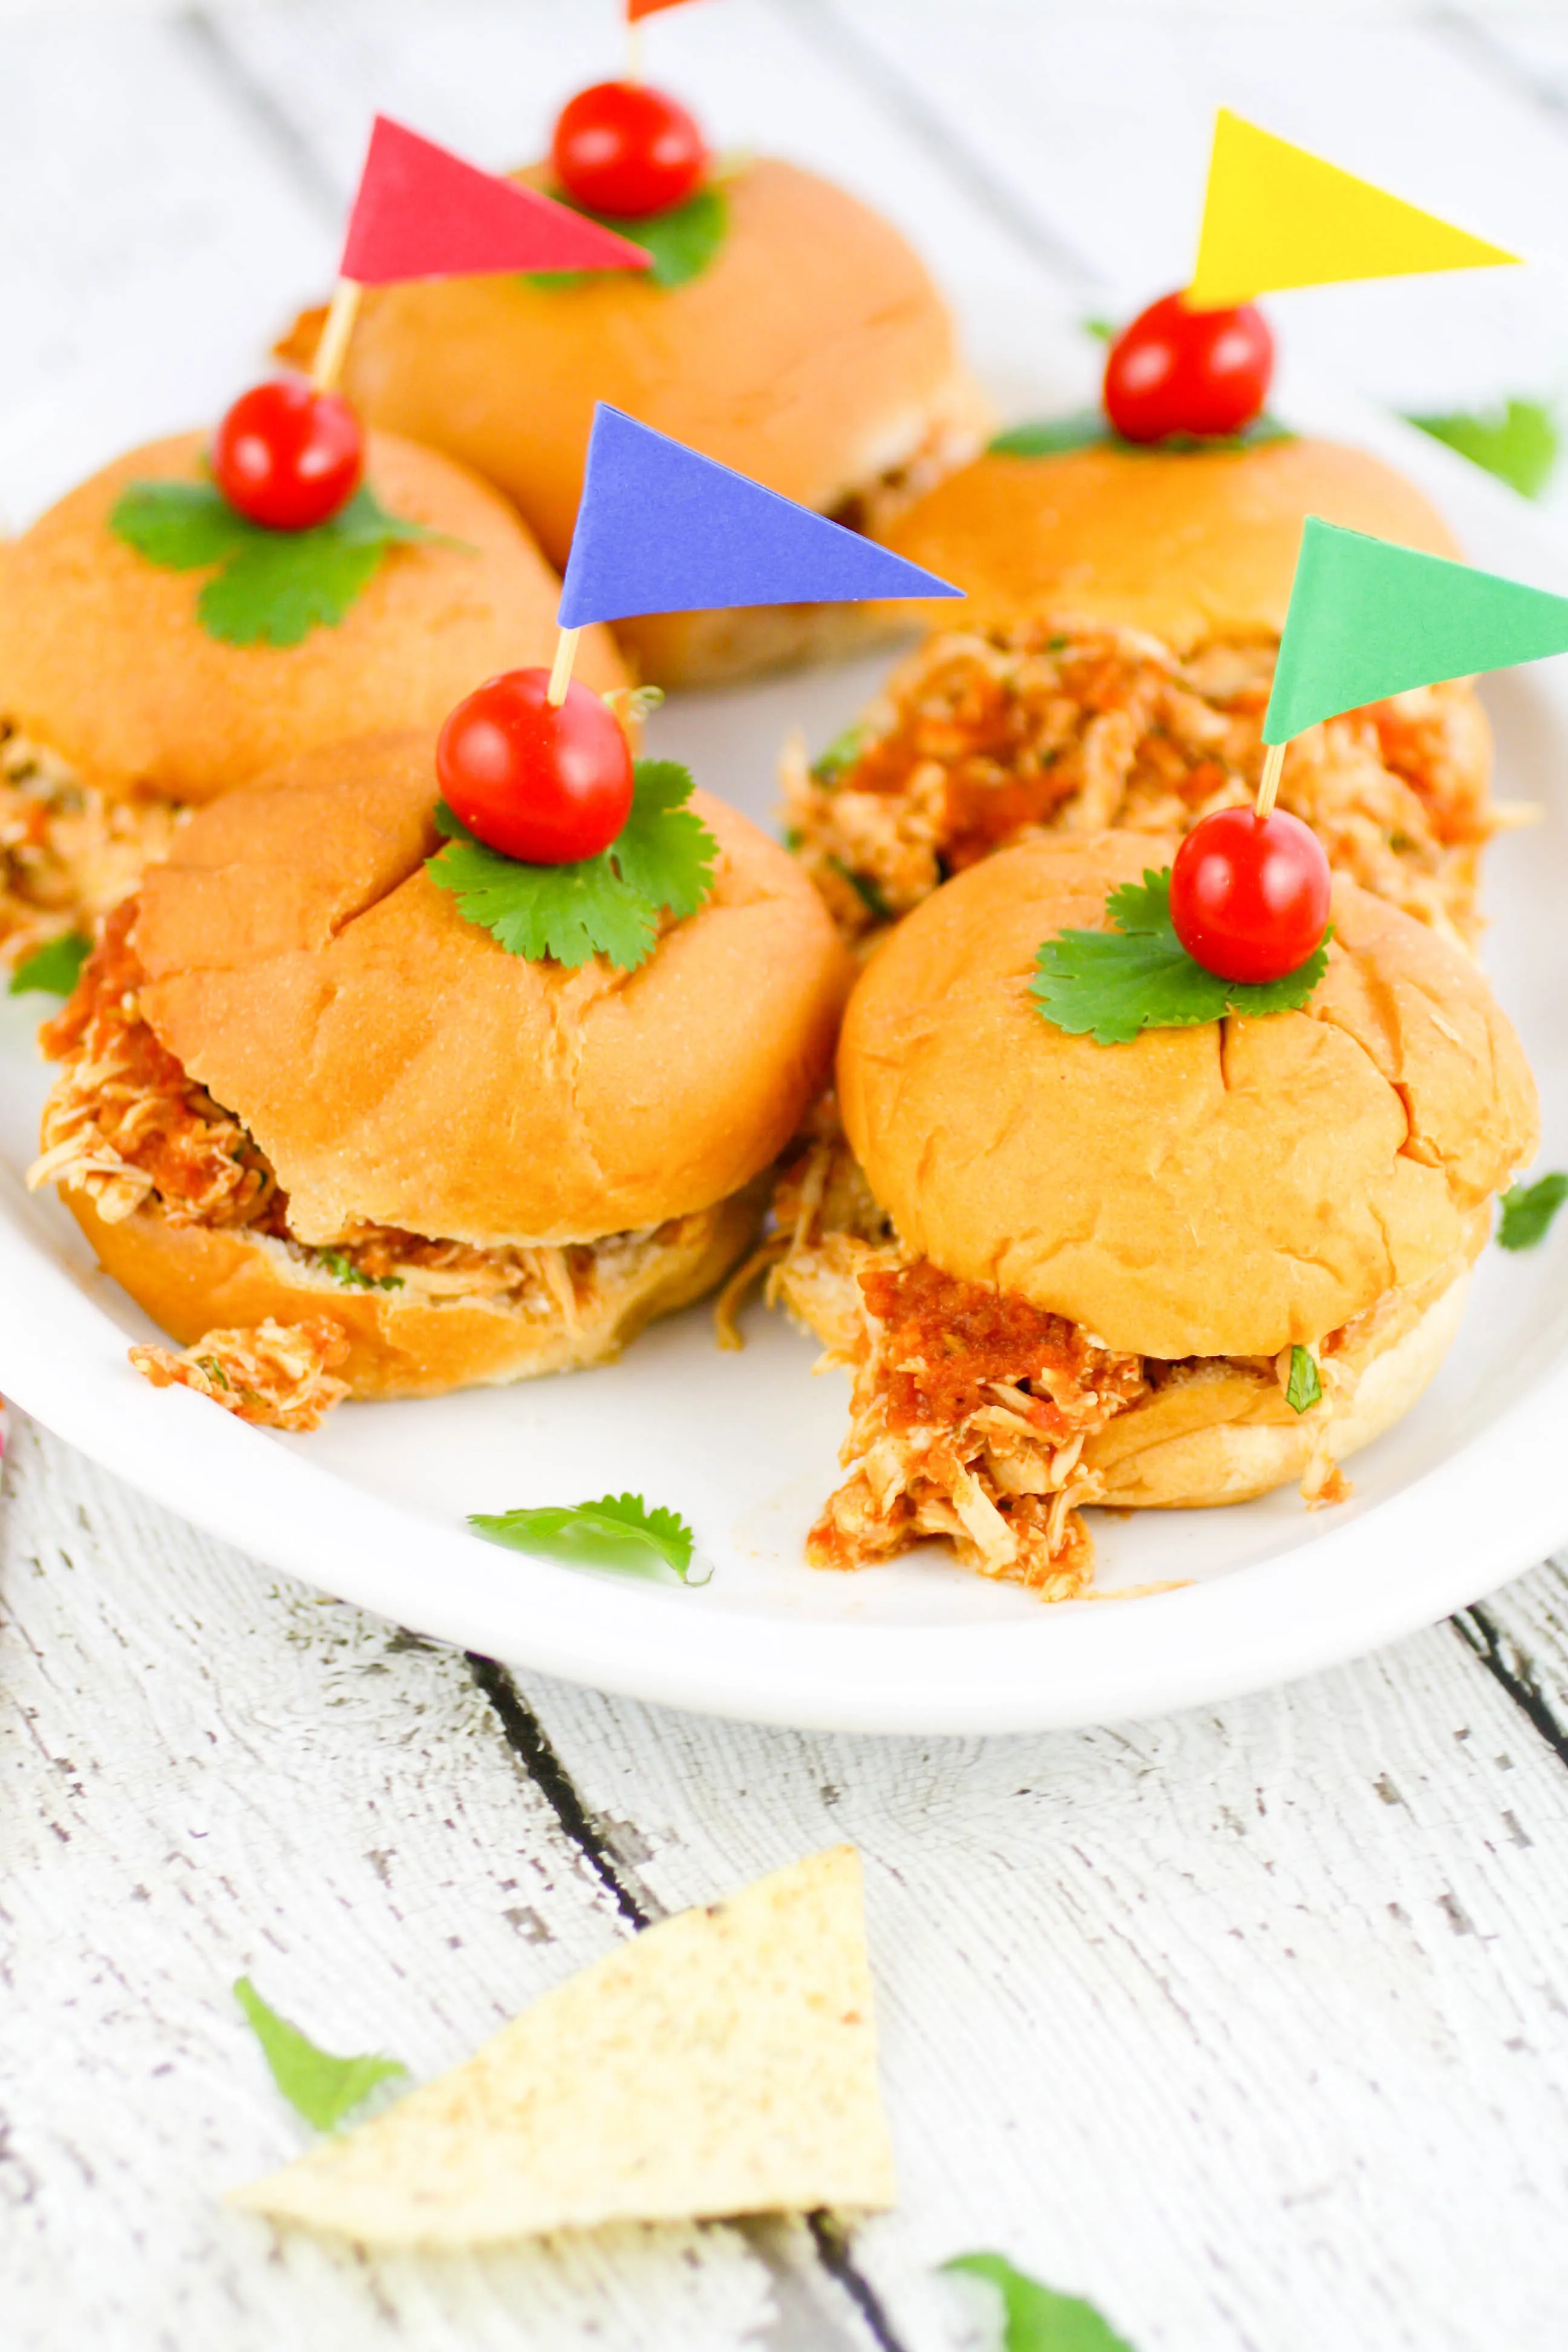 Slow Cooker Southwestern Pulled Chicken Sandwiches are tasty and so easy to make. Slow Cooker Southwestern Pulled Chicken Sandwiches are ideal for feeding a crowd, and tasty, too!